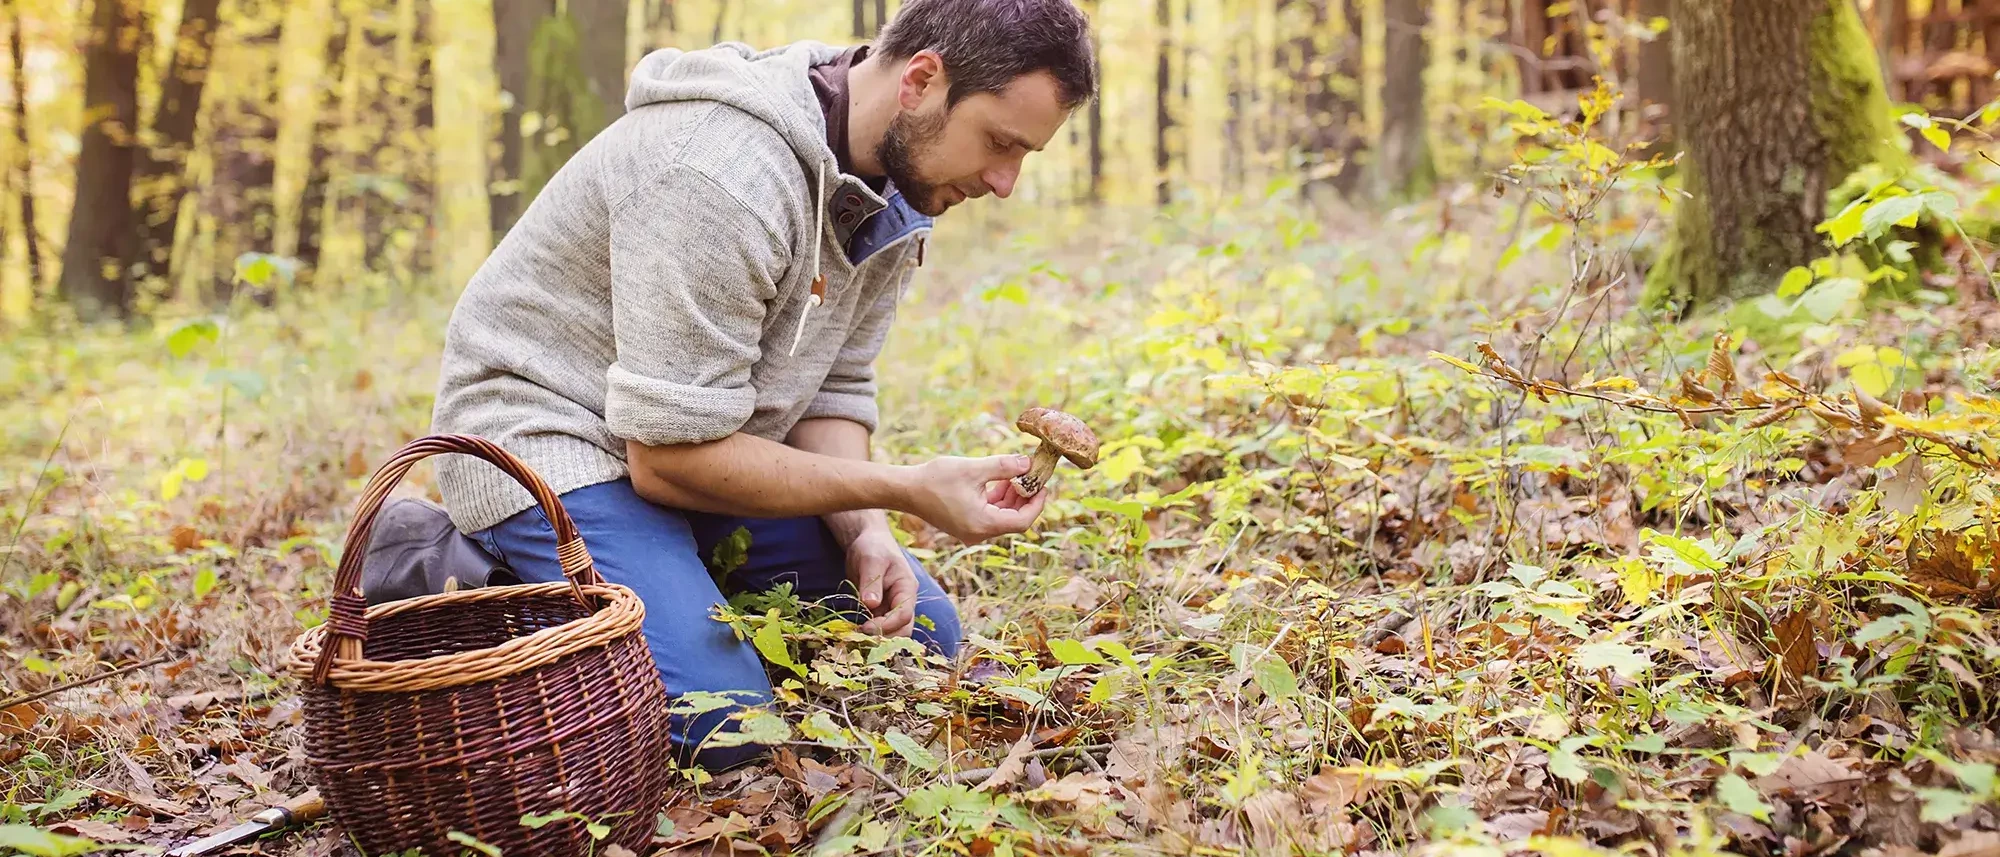 man in forest with basket foraging for wild mushrooms in foraging experience team building activity